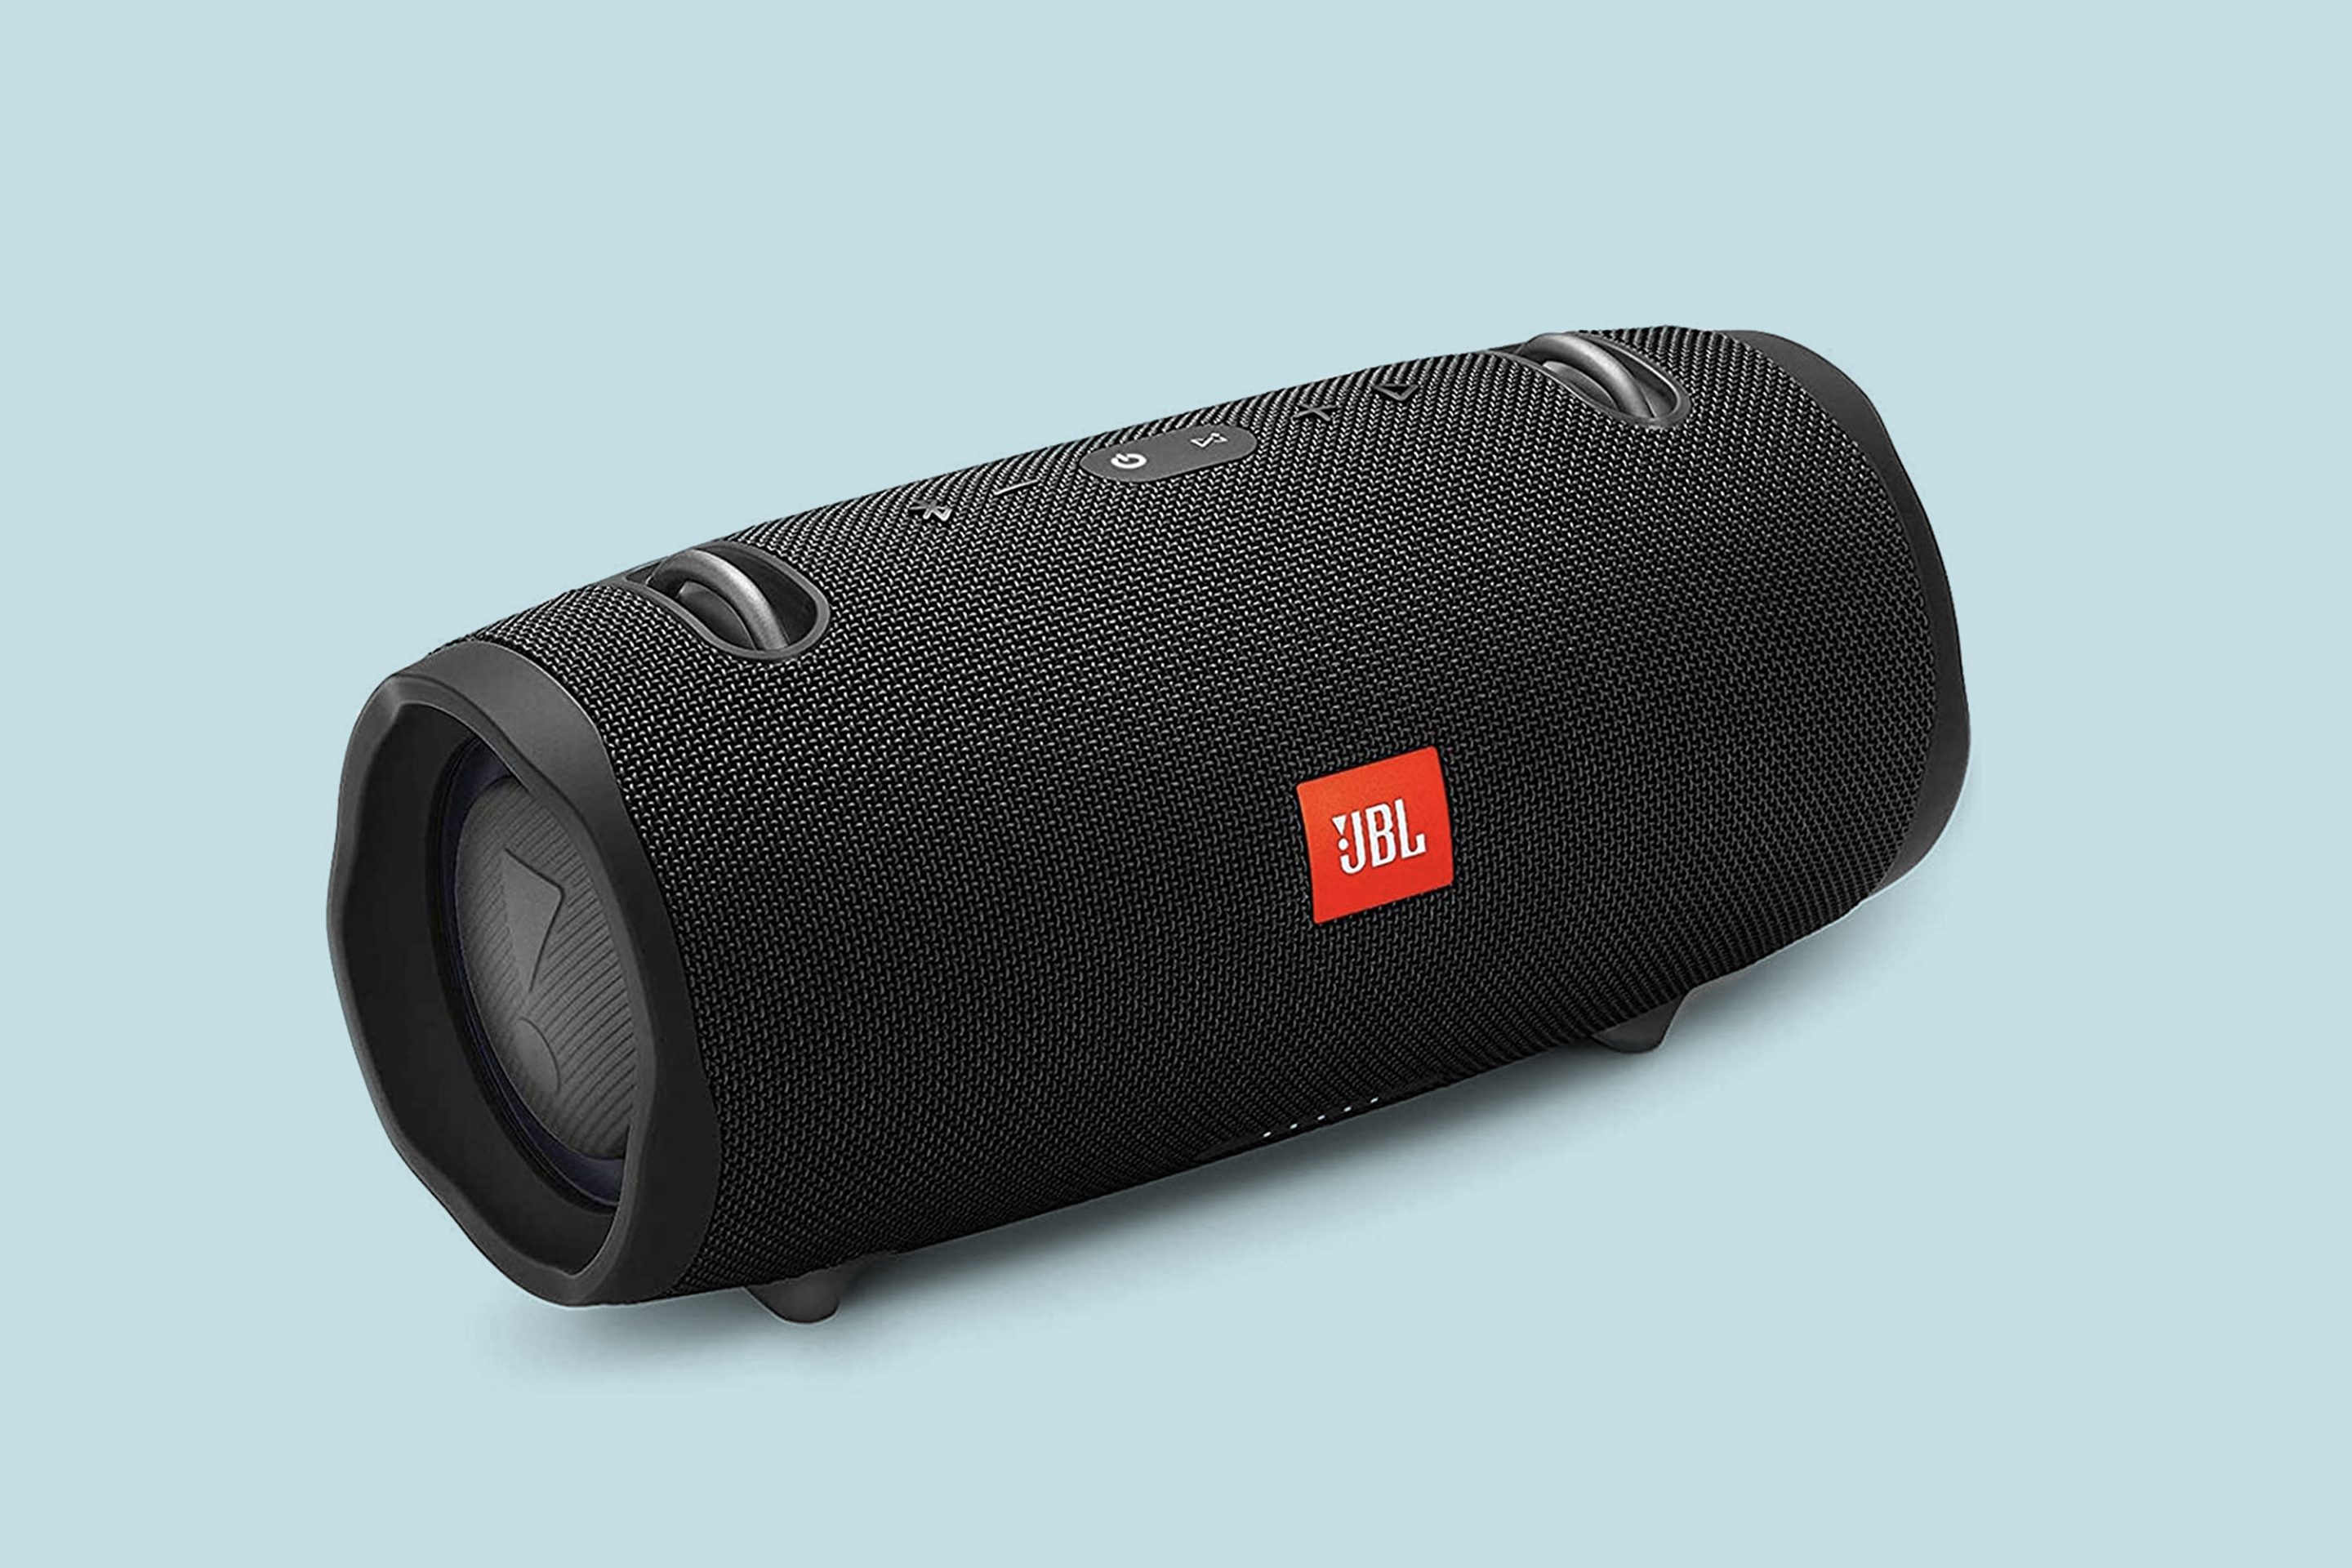 Prime Day Deals: Waterproof JBL Bluetooth Speakers Are $200 off Right Now